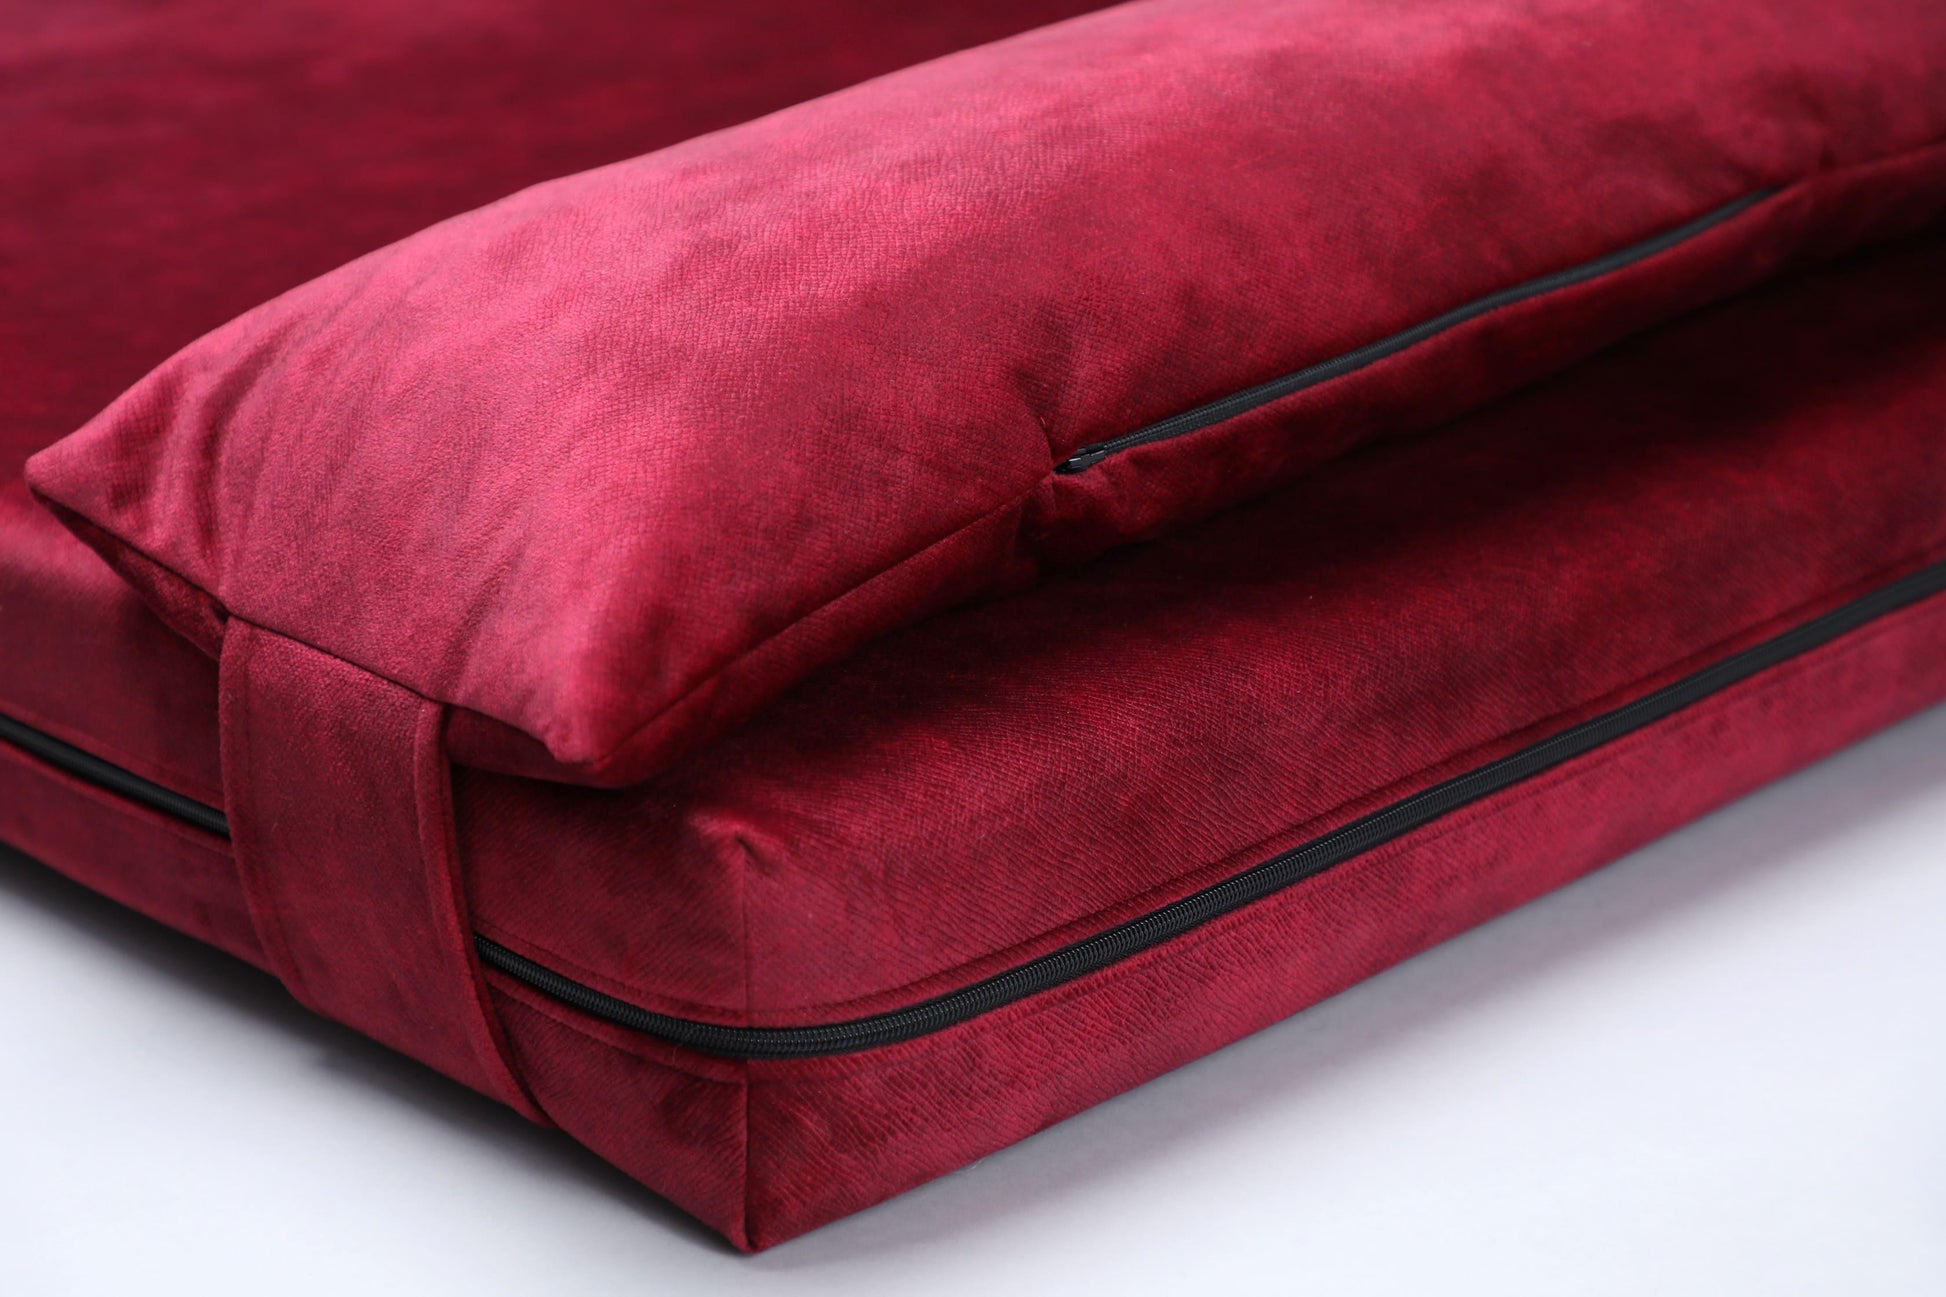 Dog bed for large dogs | Extra comfort & support | 2-sided | RUBY RED - premium dog goods handmade in Europe by My Wild Other